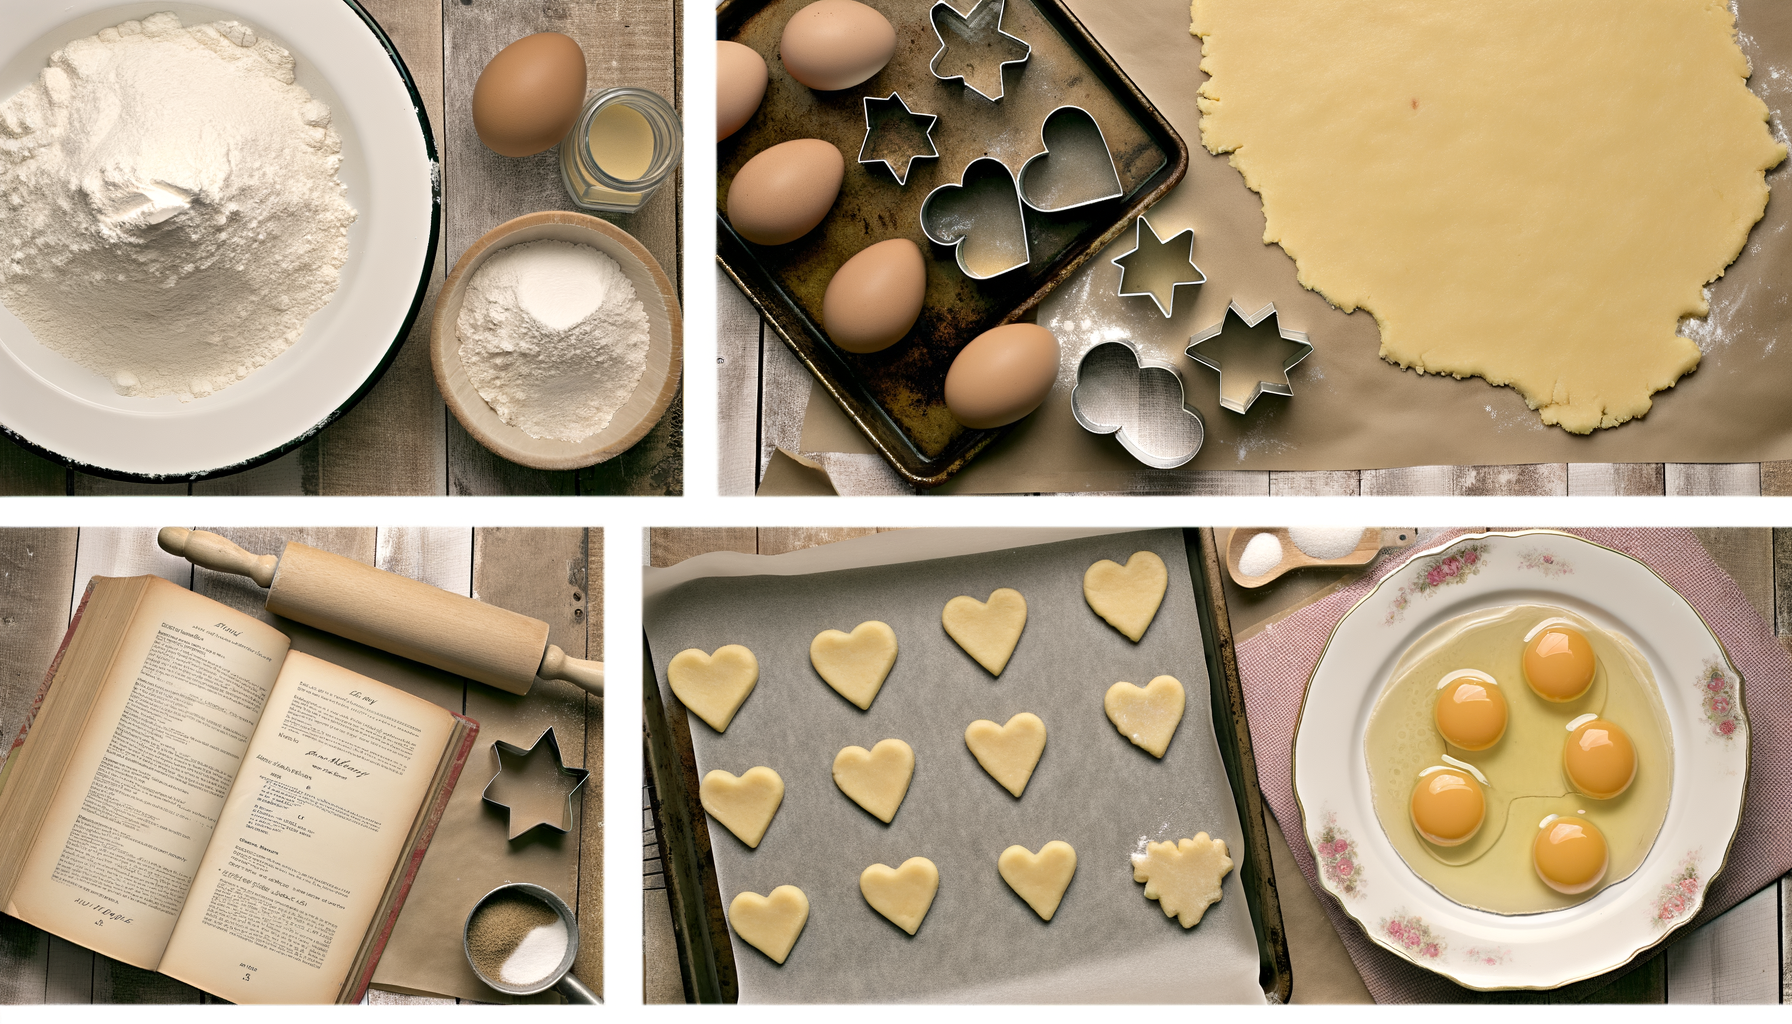 Vintage wooden table with ingredients for sugar cookies, rolled dough with heart and star shapes, unbaked cookies on tray, plate of baked cookies, and recipe book.